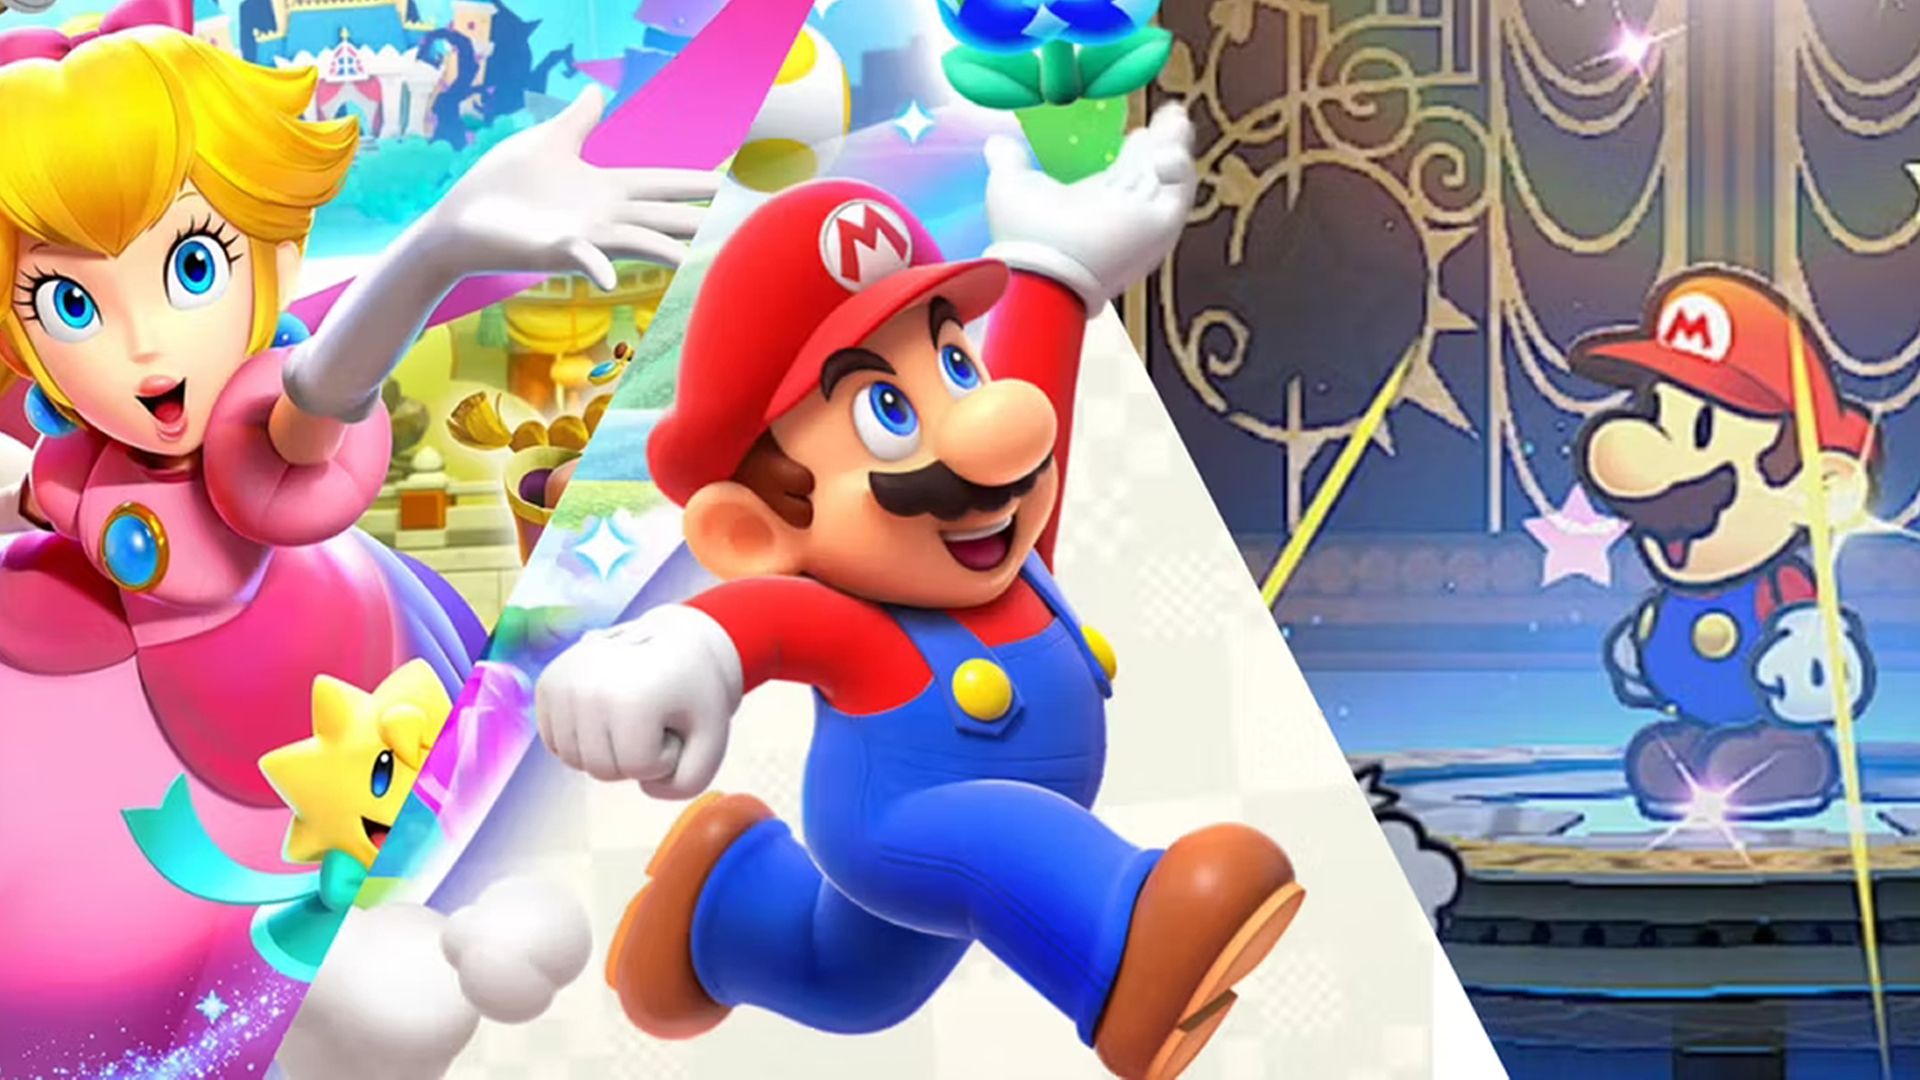 Every New Mario Game Coming Out In 2023 & 2024